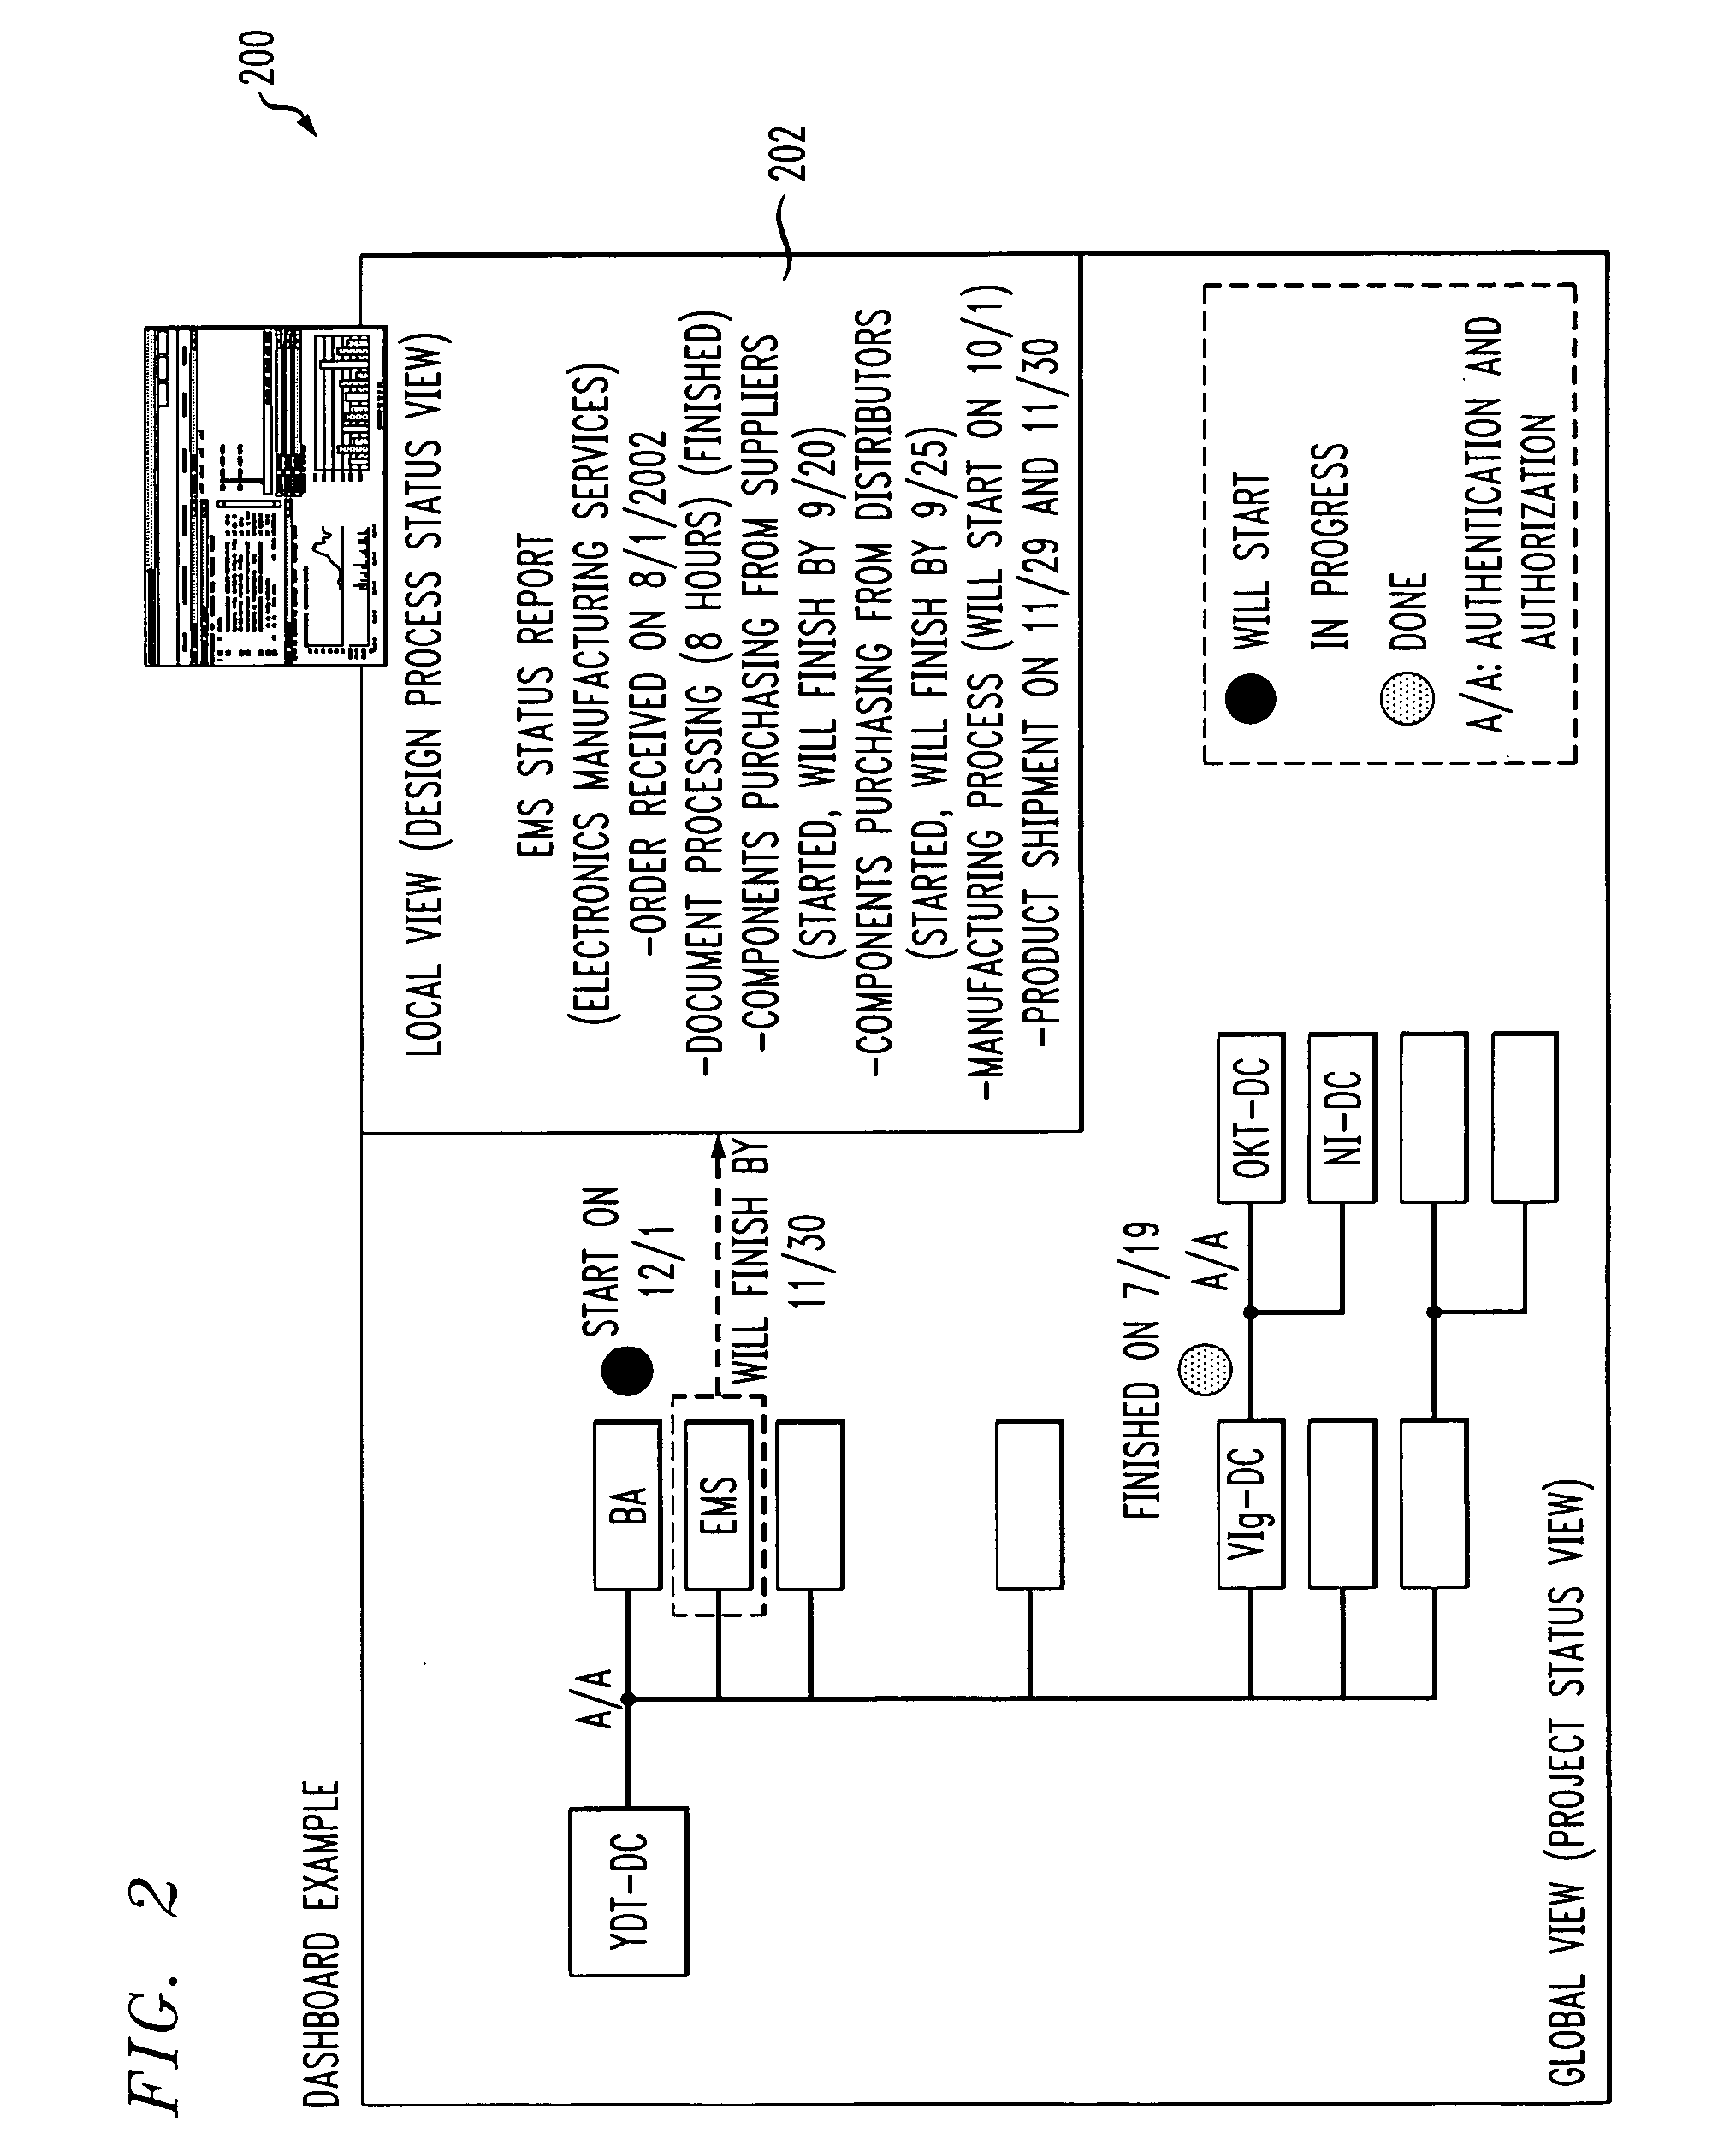 Methods and apparatus for decision support activation and management in product life cycle management